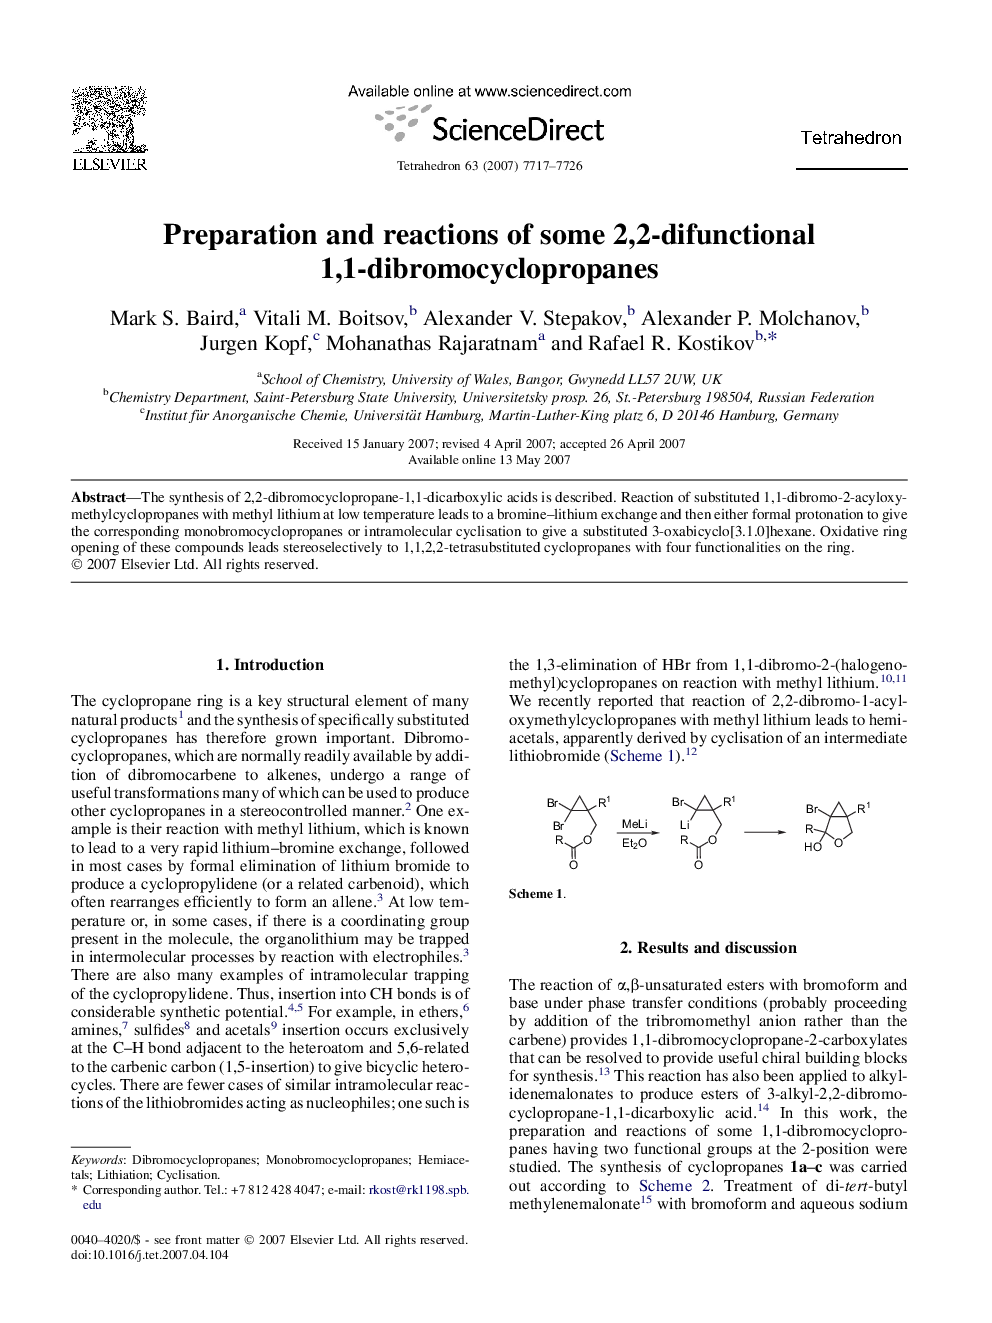 Preparation and reactions of some 2,2-difunctional 1,1-dibromocyclopropanes